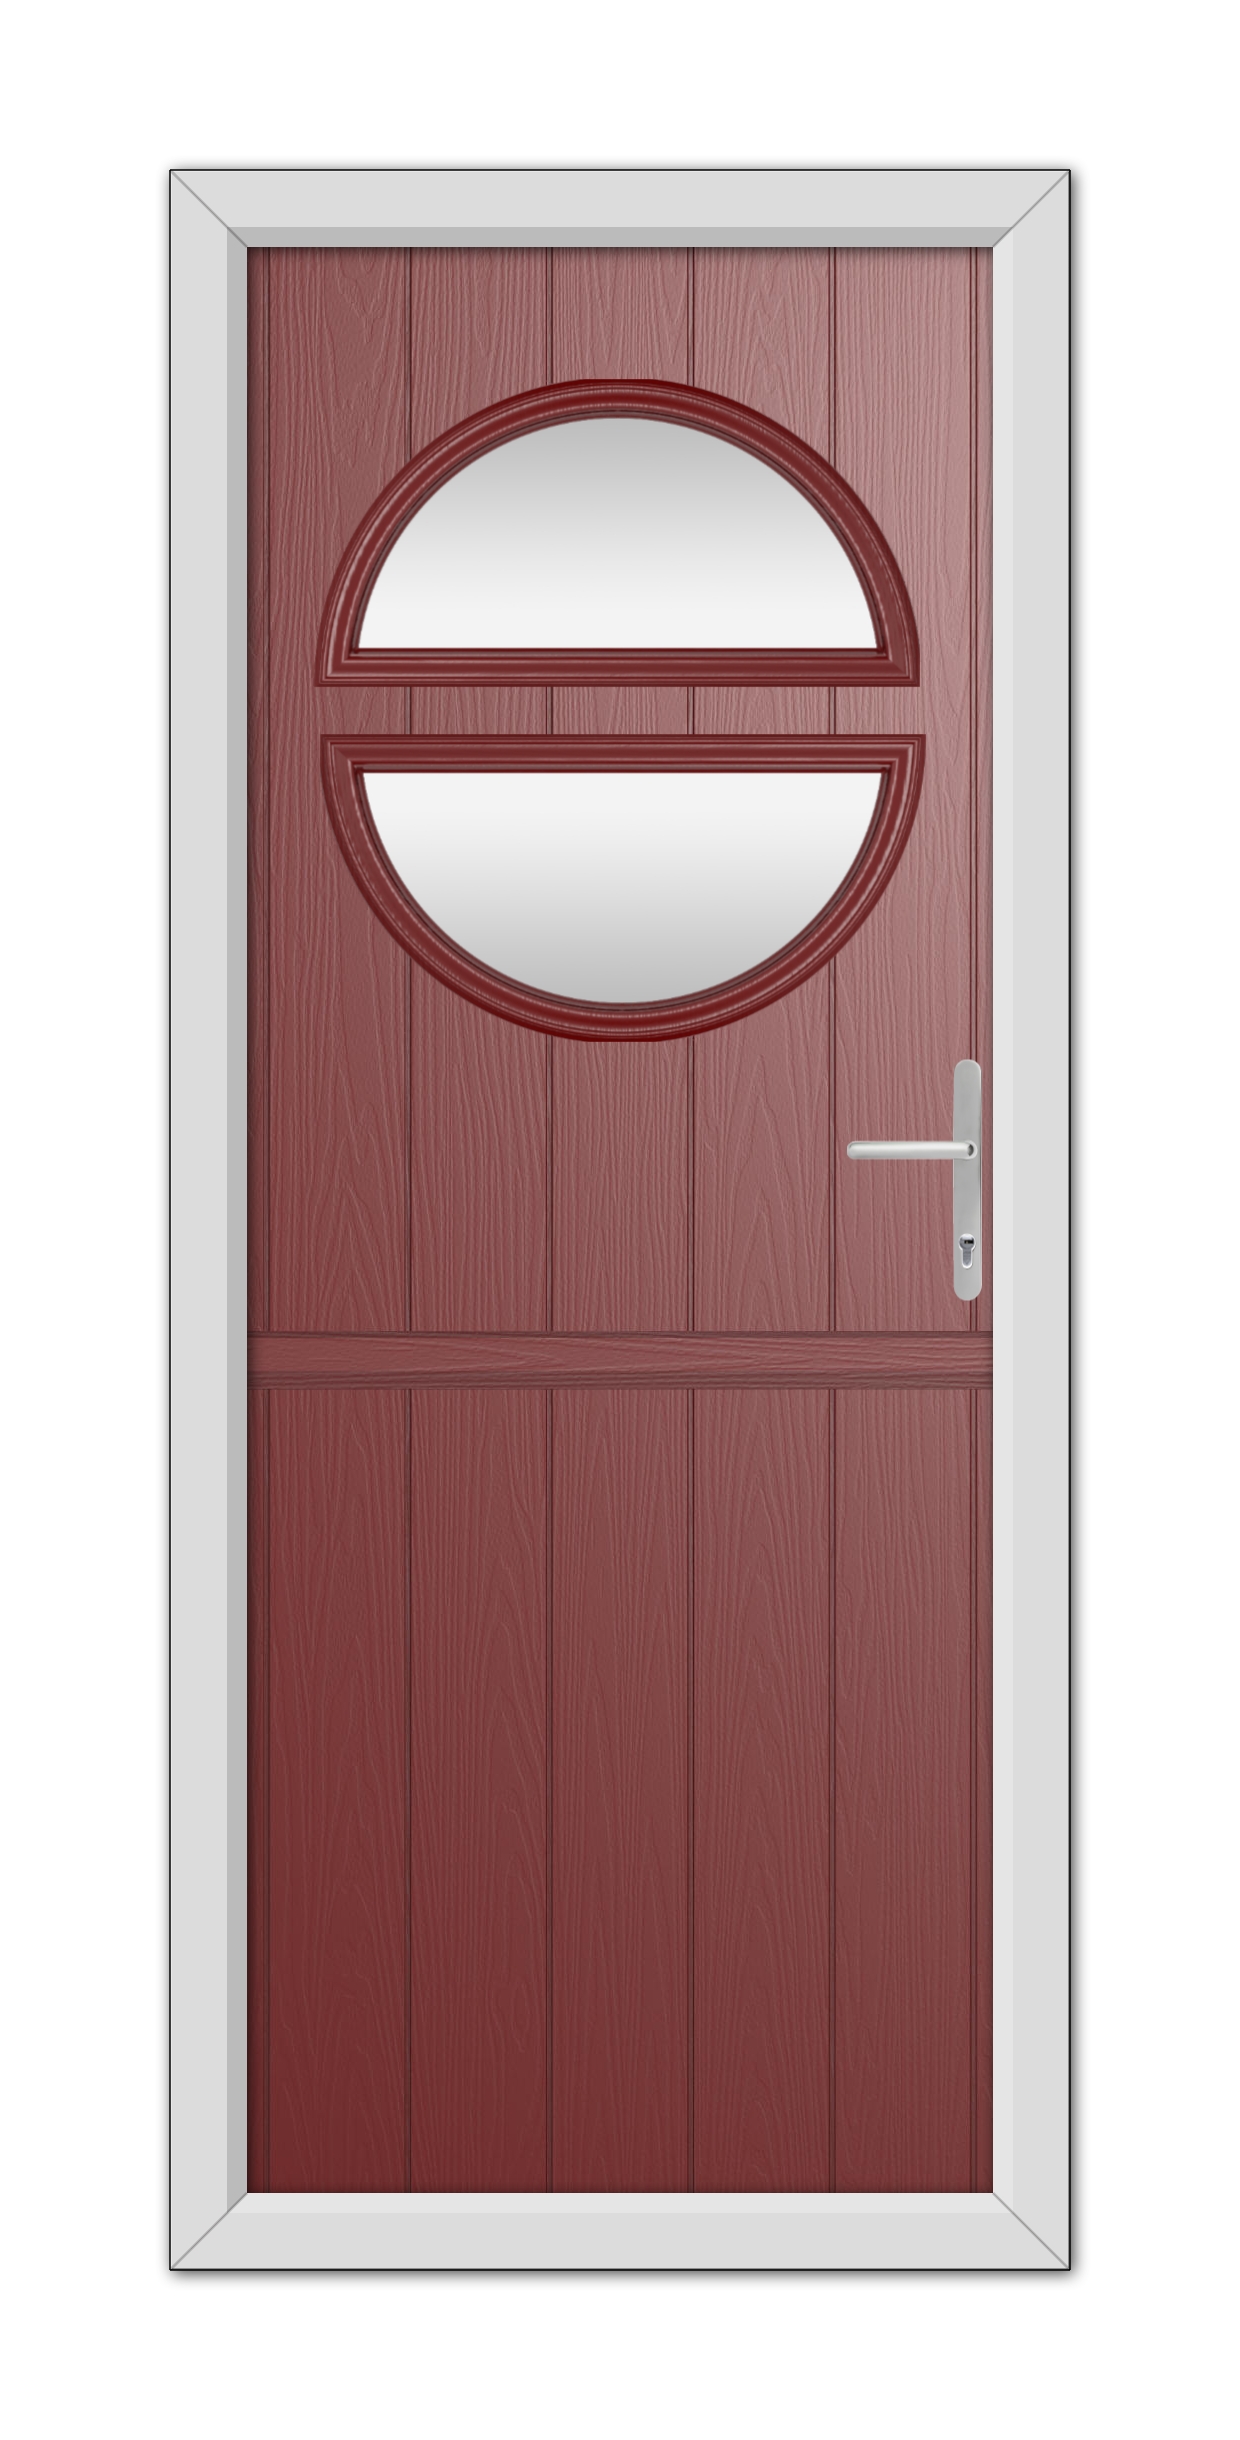 Modern Red Kent Stable Composite Door 48mm Timber Core with an oval glass window at the top and a silver handle, set within a white frame.